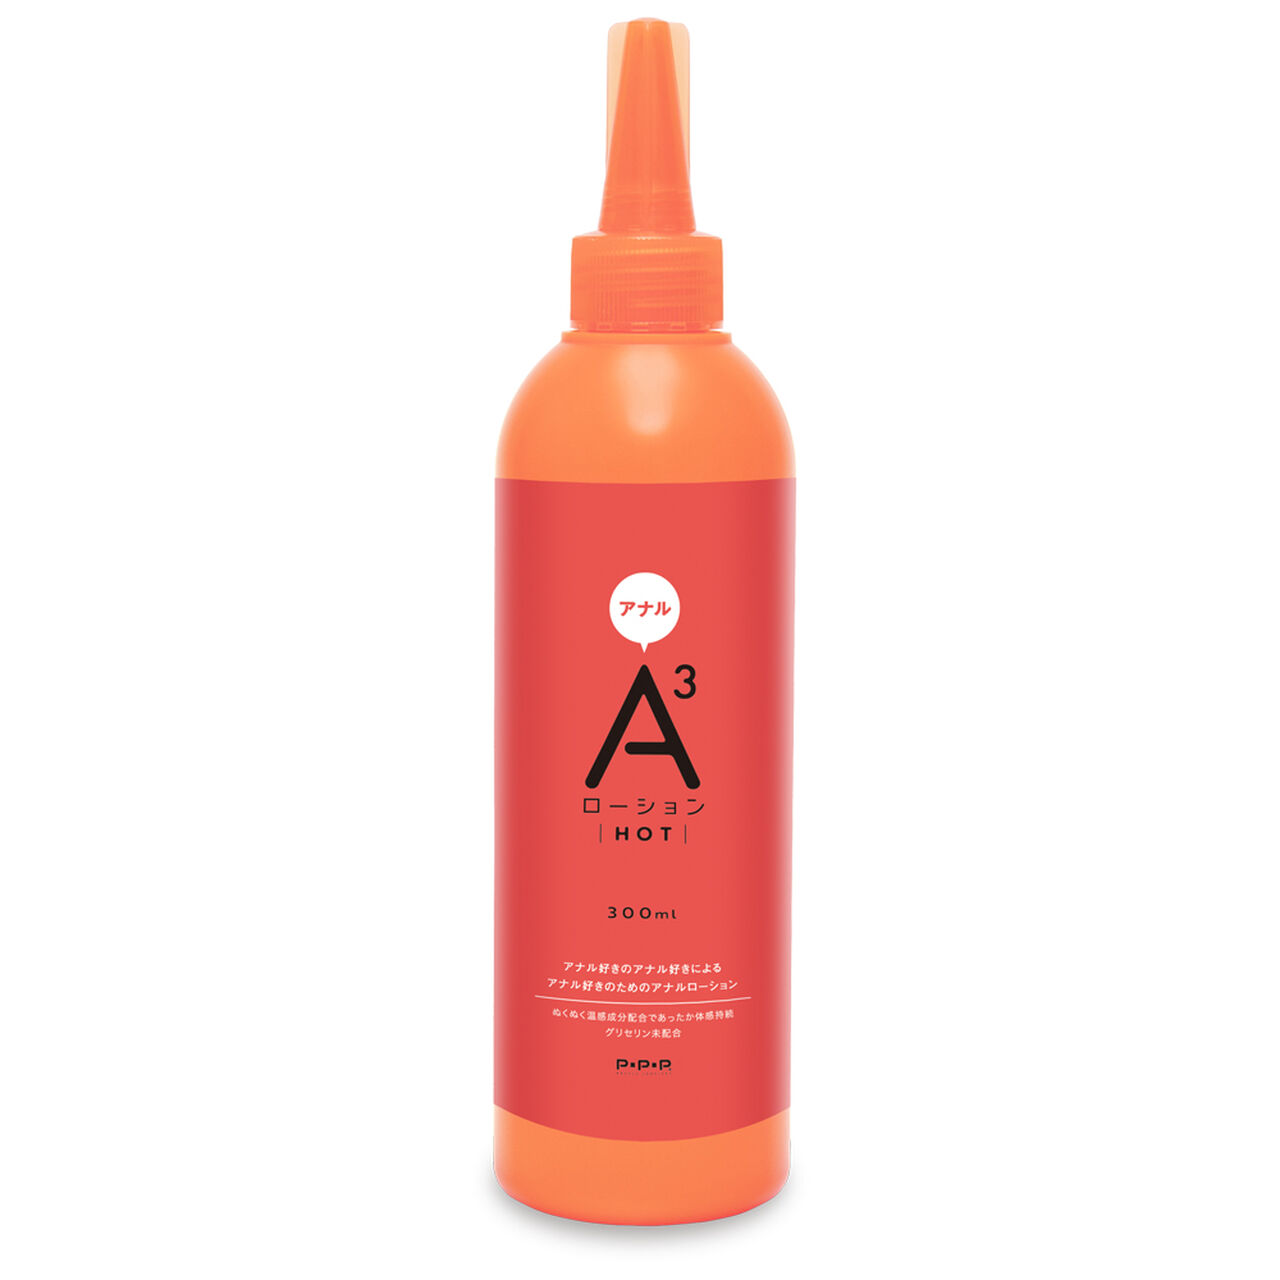 A3 ANAL LOTION HOT 300ml,, large image number 0